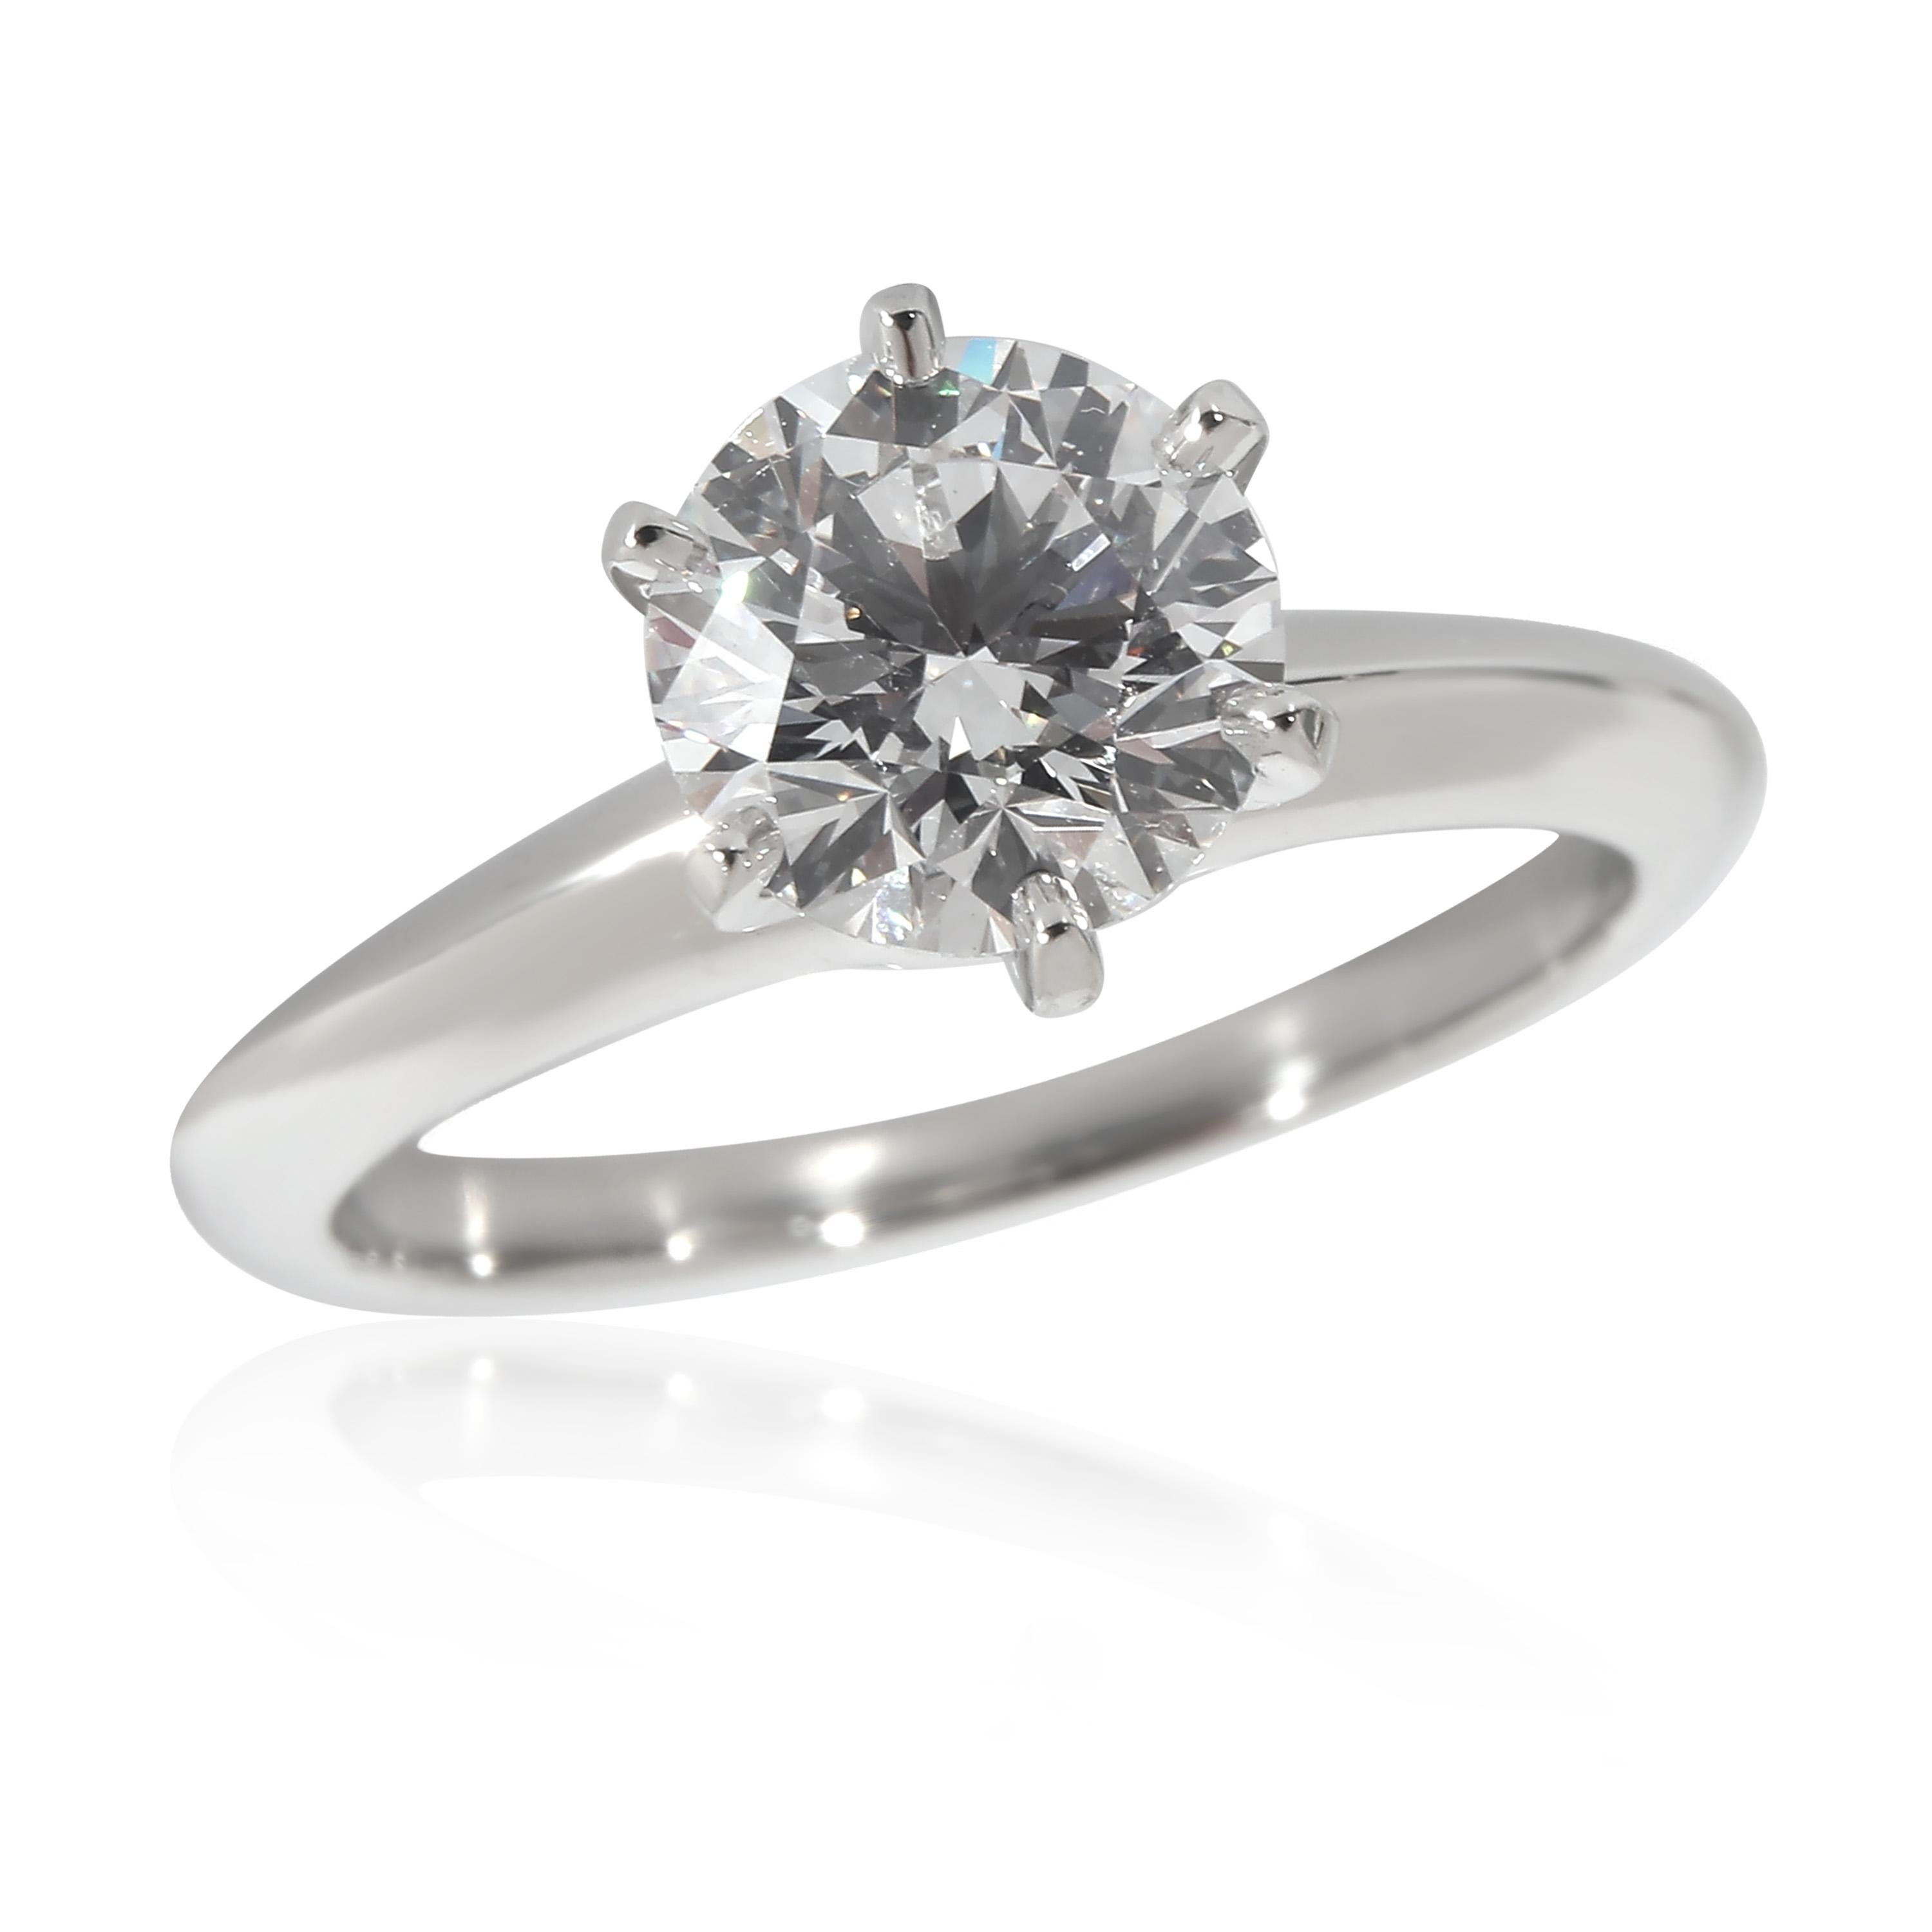 Tiffany & Co. Diamond Engagement Ring in  Platinum E VS2 1.29 CTW In Excellent Condition For Sale In New York, NY